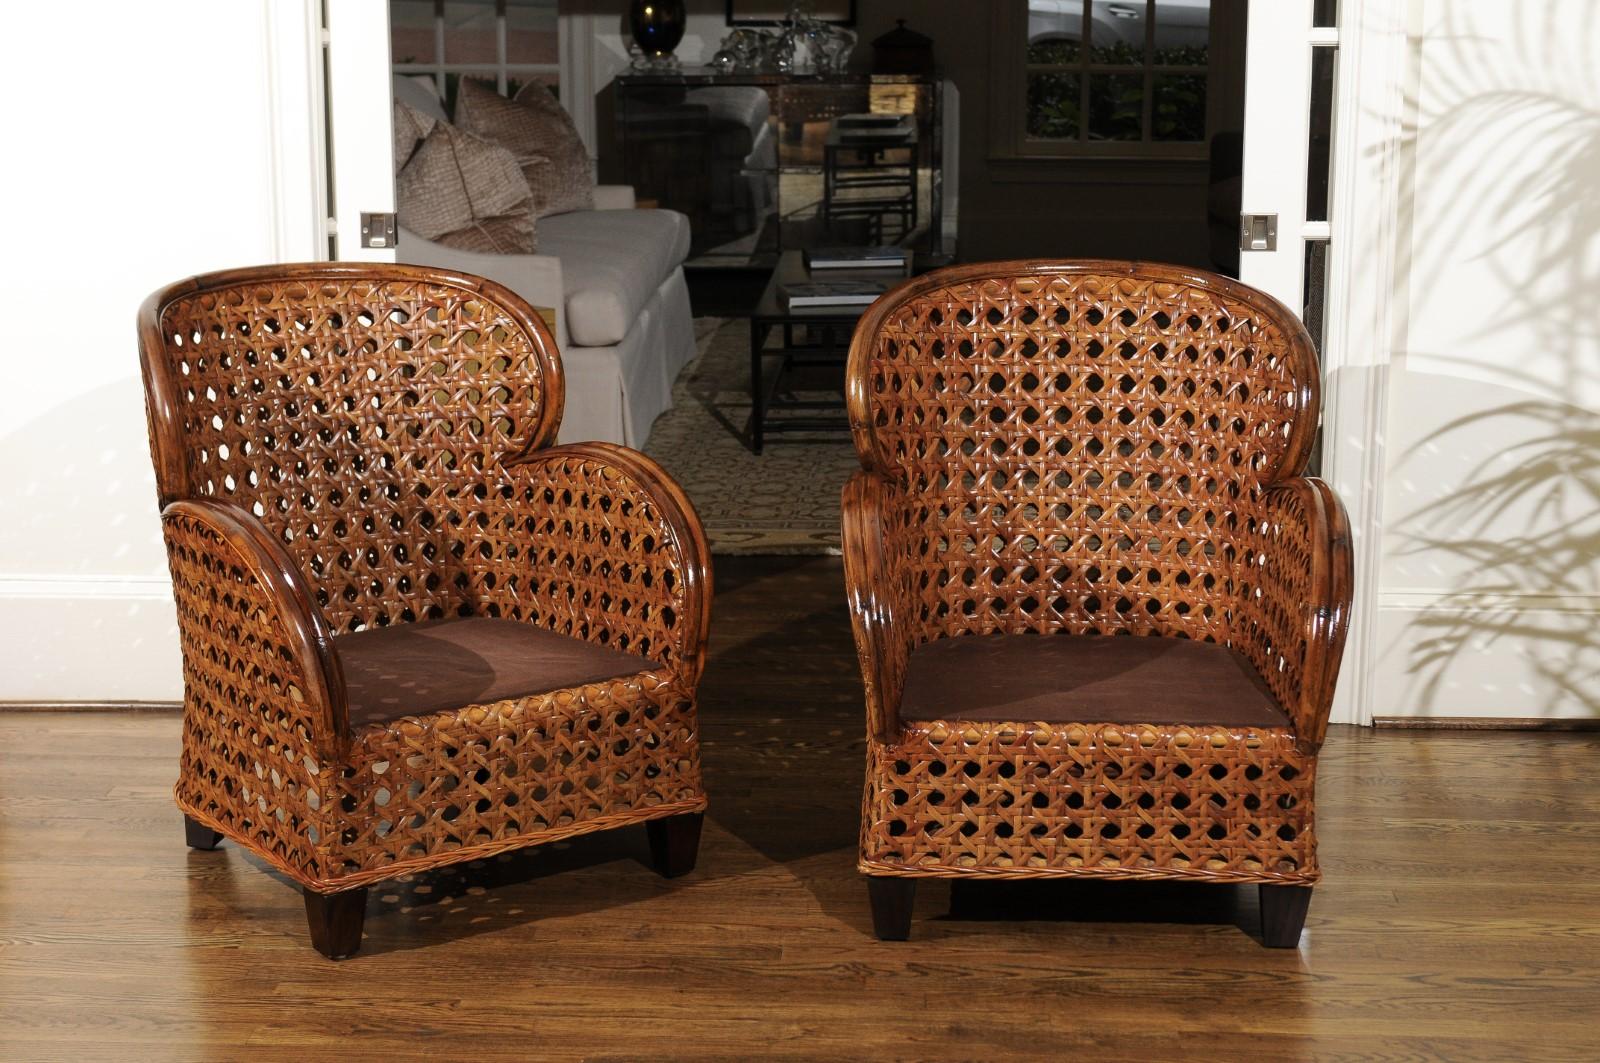 An exquisite restored pair of rattan Art Deco Revival club chairs, circa 1980. Fabulous rattan frame construction completely veneered in heavy French Cane. Design, quality and craftsmanship that is beyond incredible. The pieces have aged to absolute